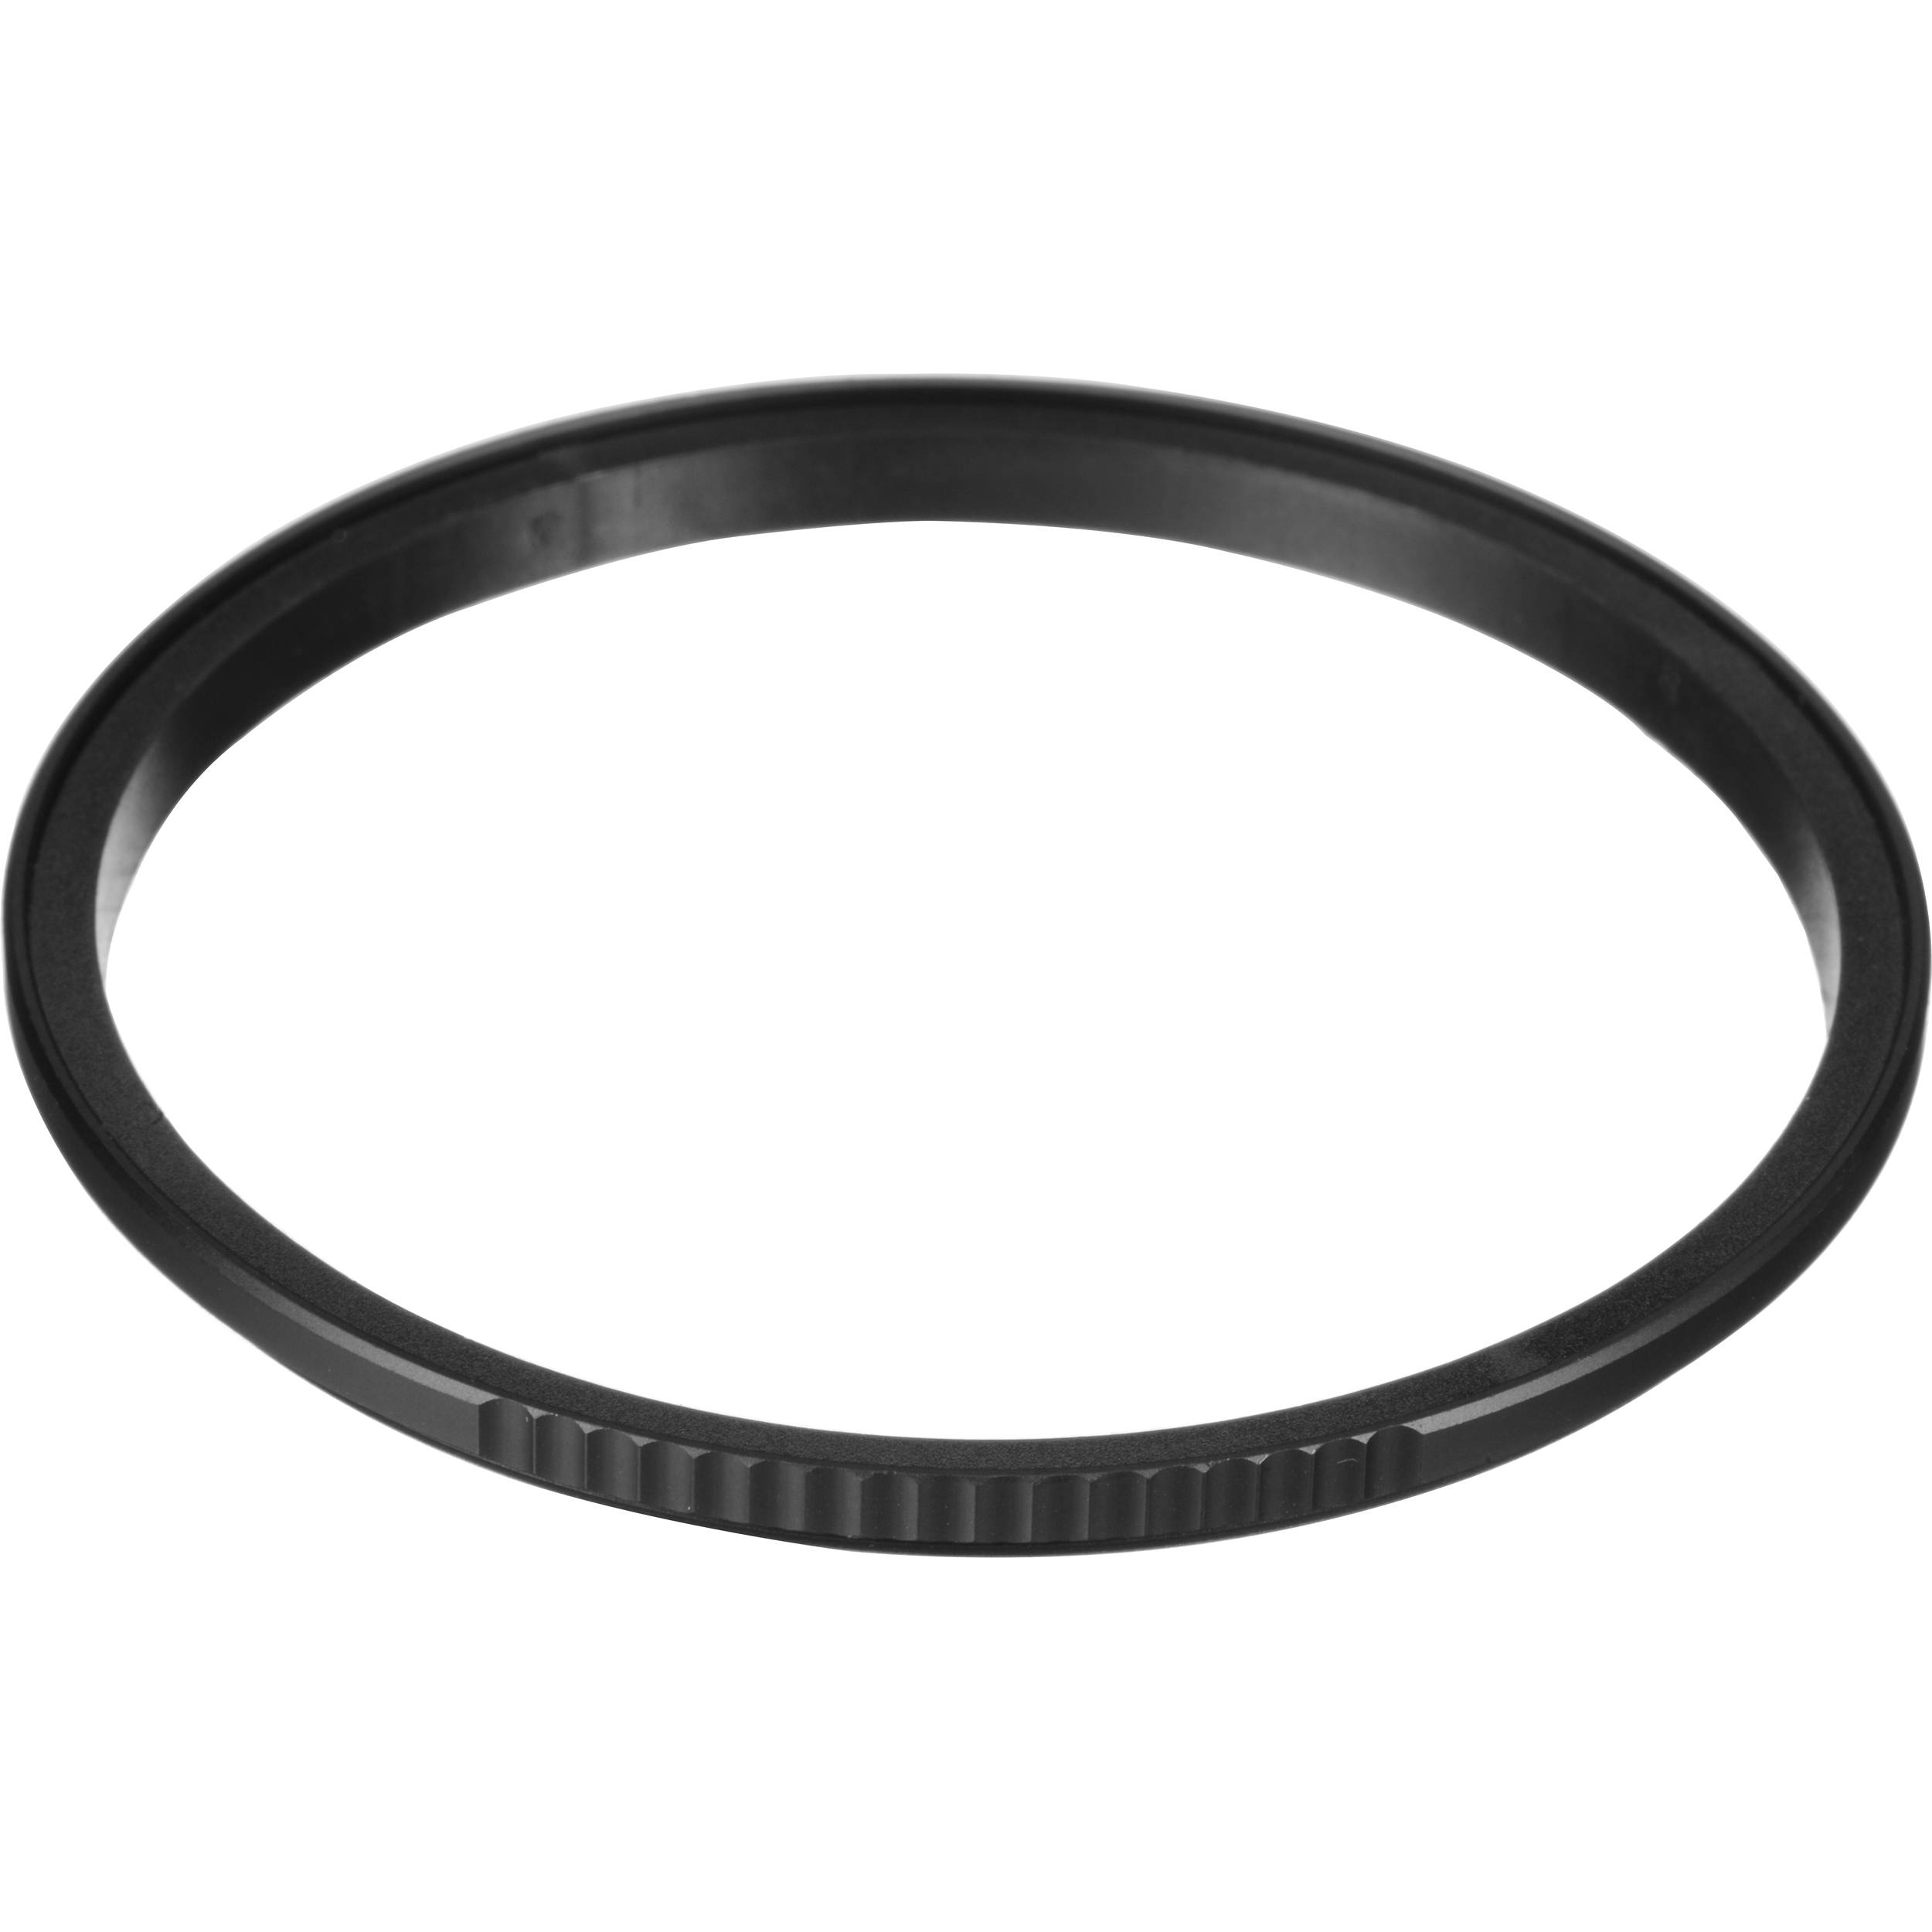 Black Manfrotto 52 mm XUME Quick Release Filter Holder